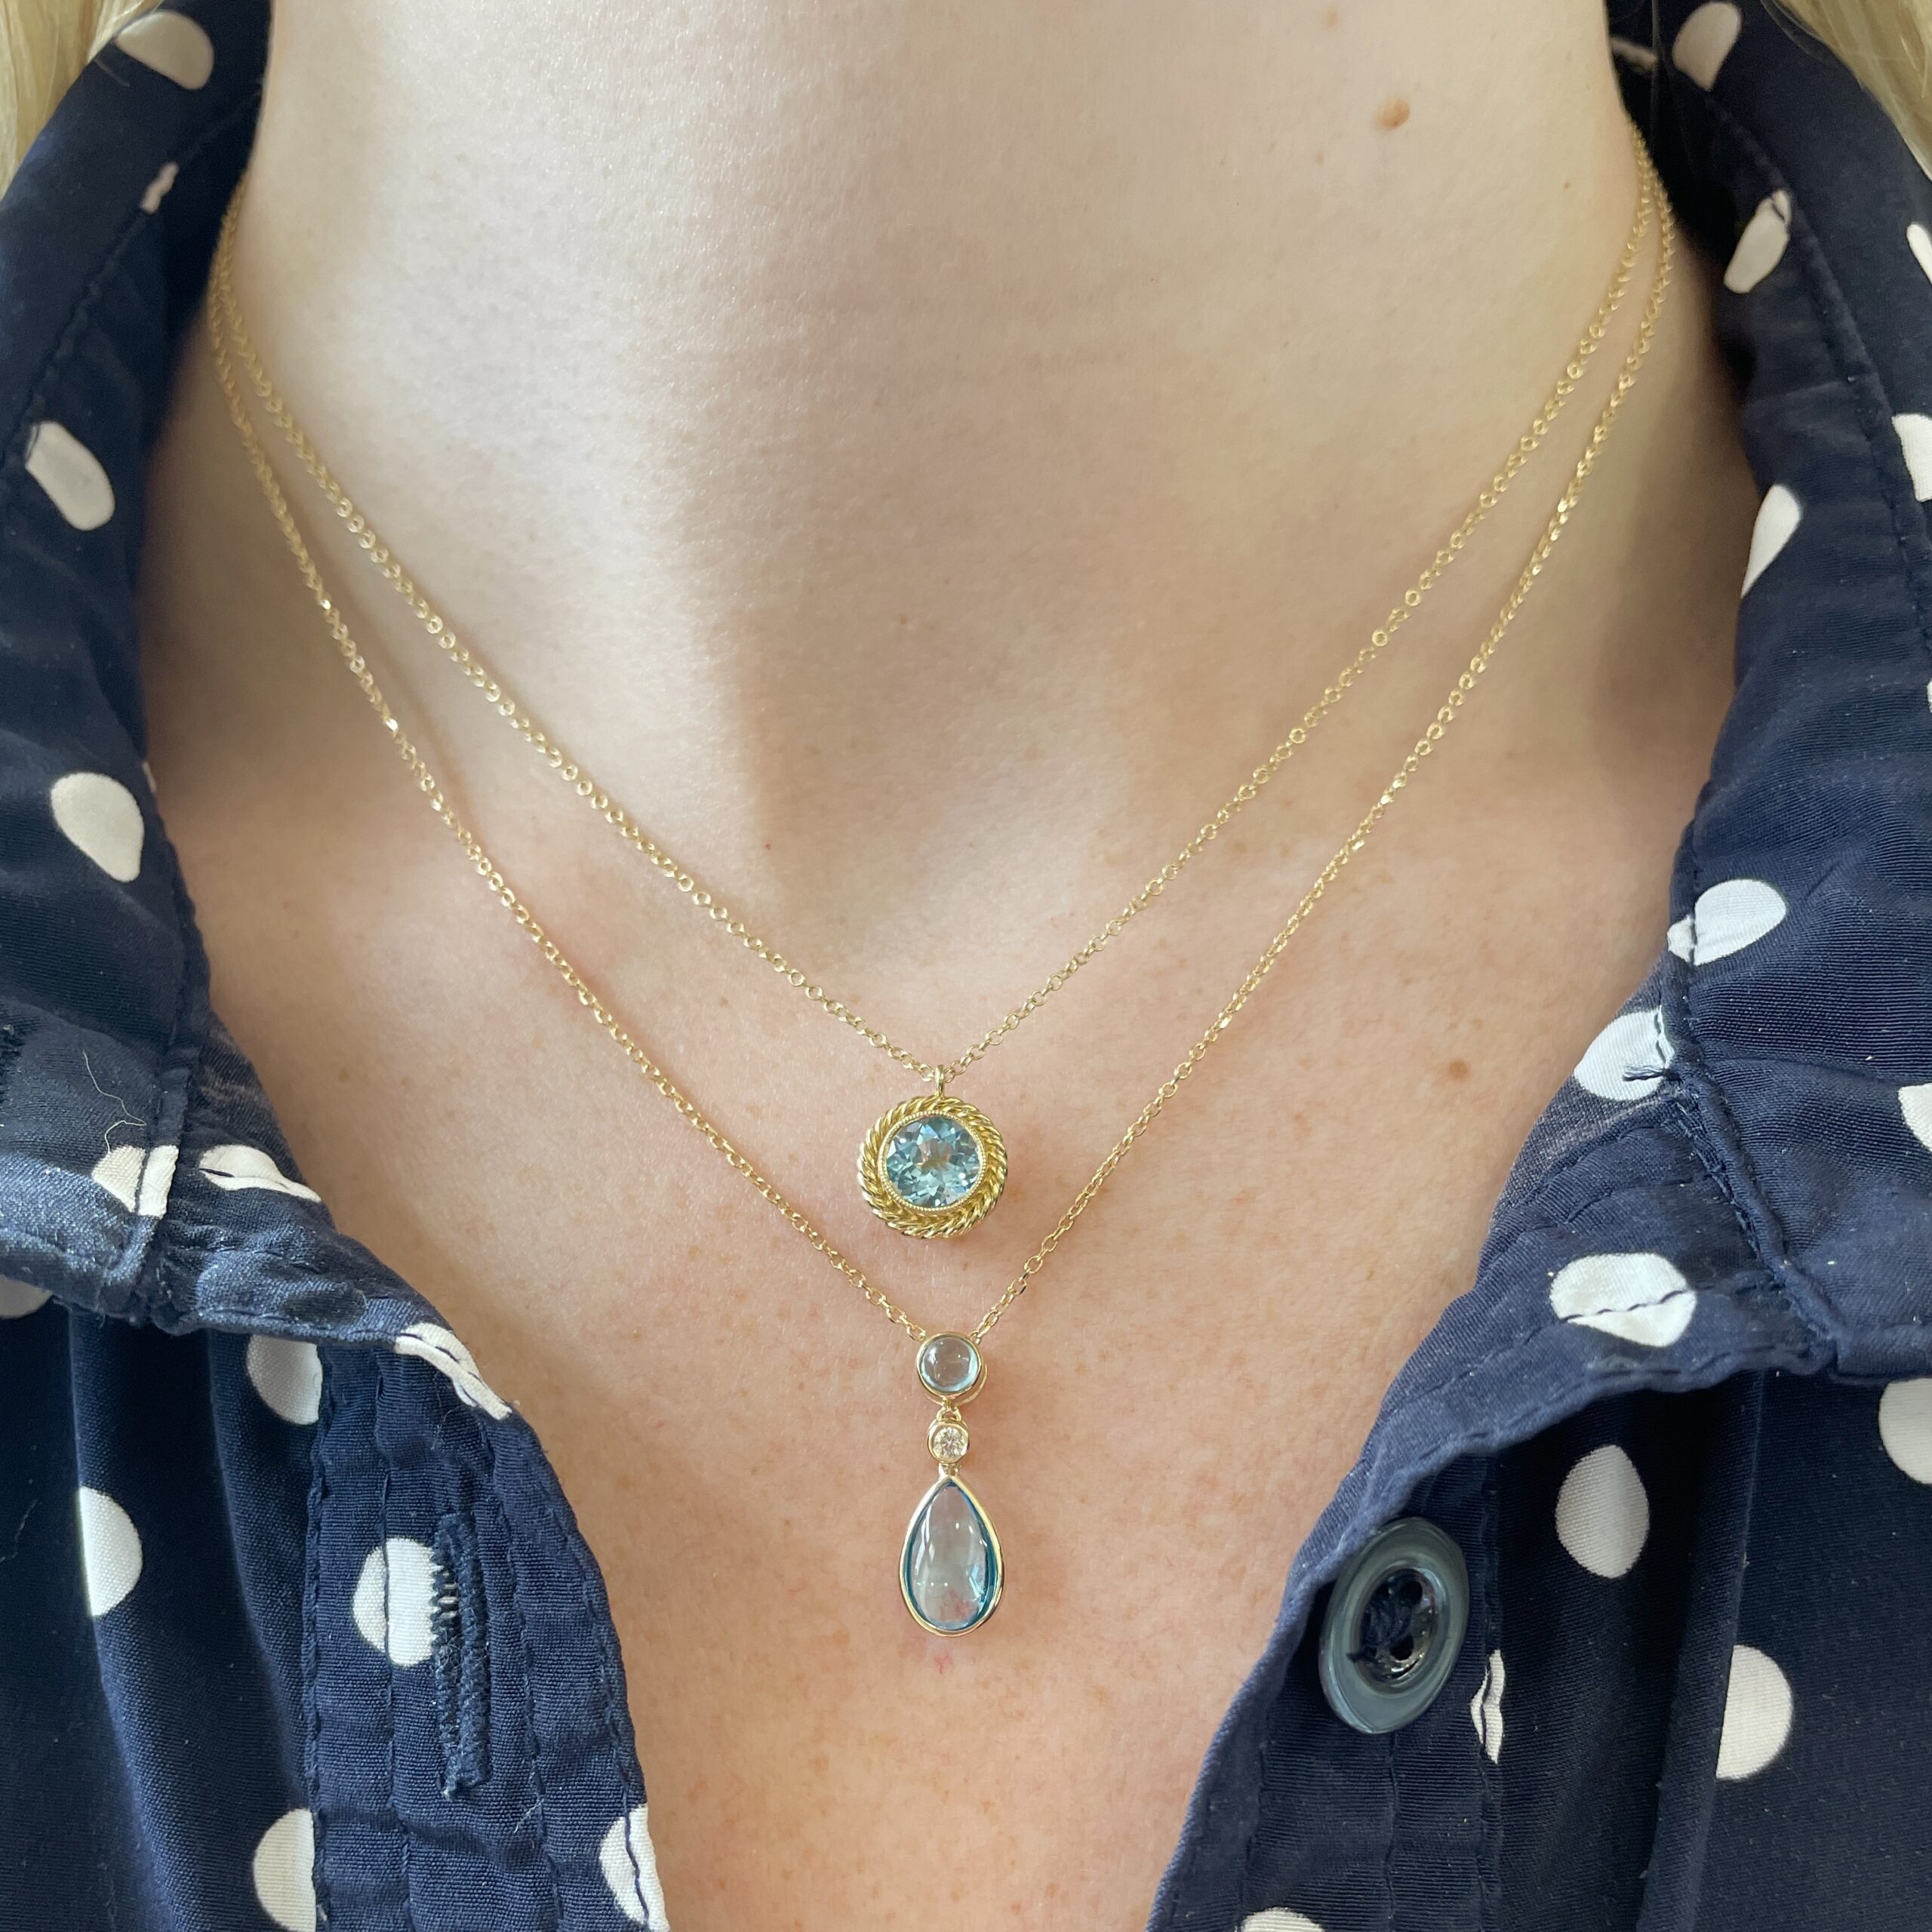 Yellow Gold Rope Halo Blue Topaz Necklace